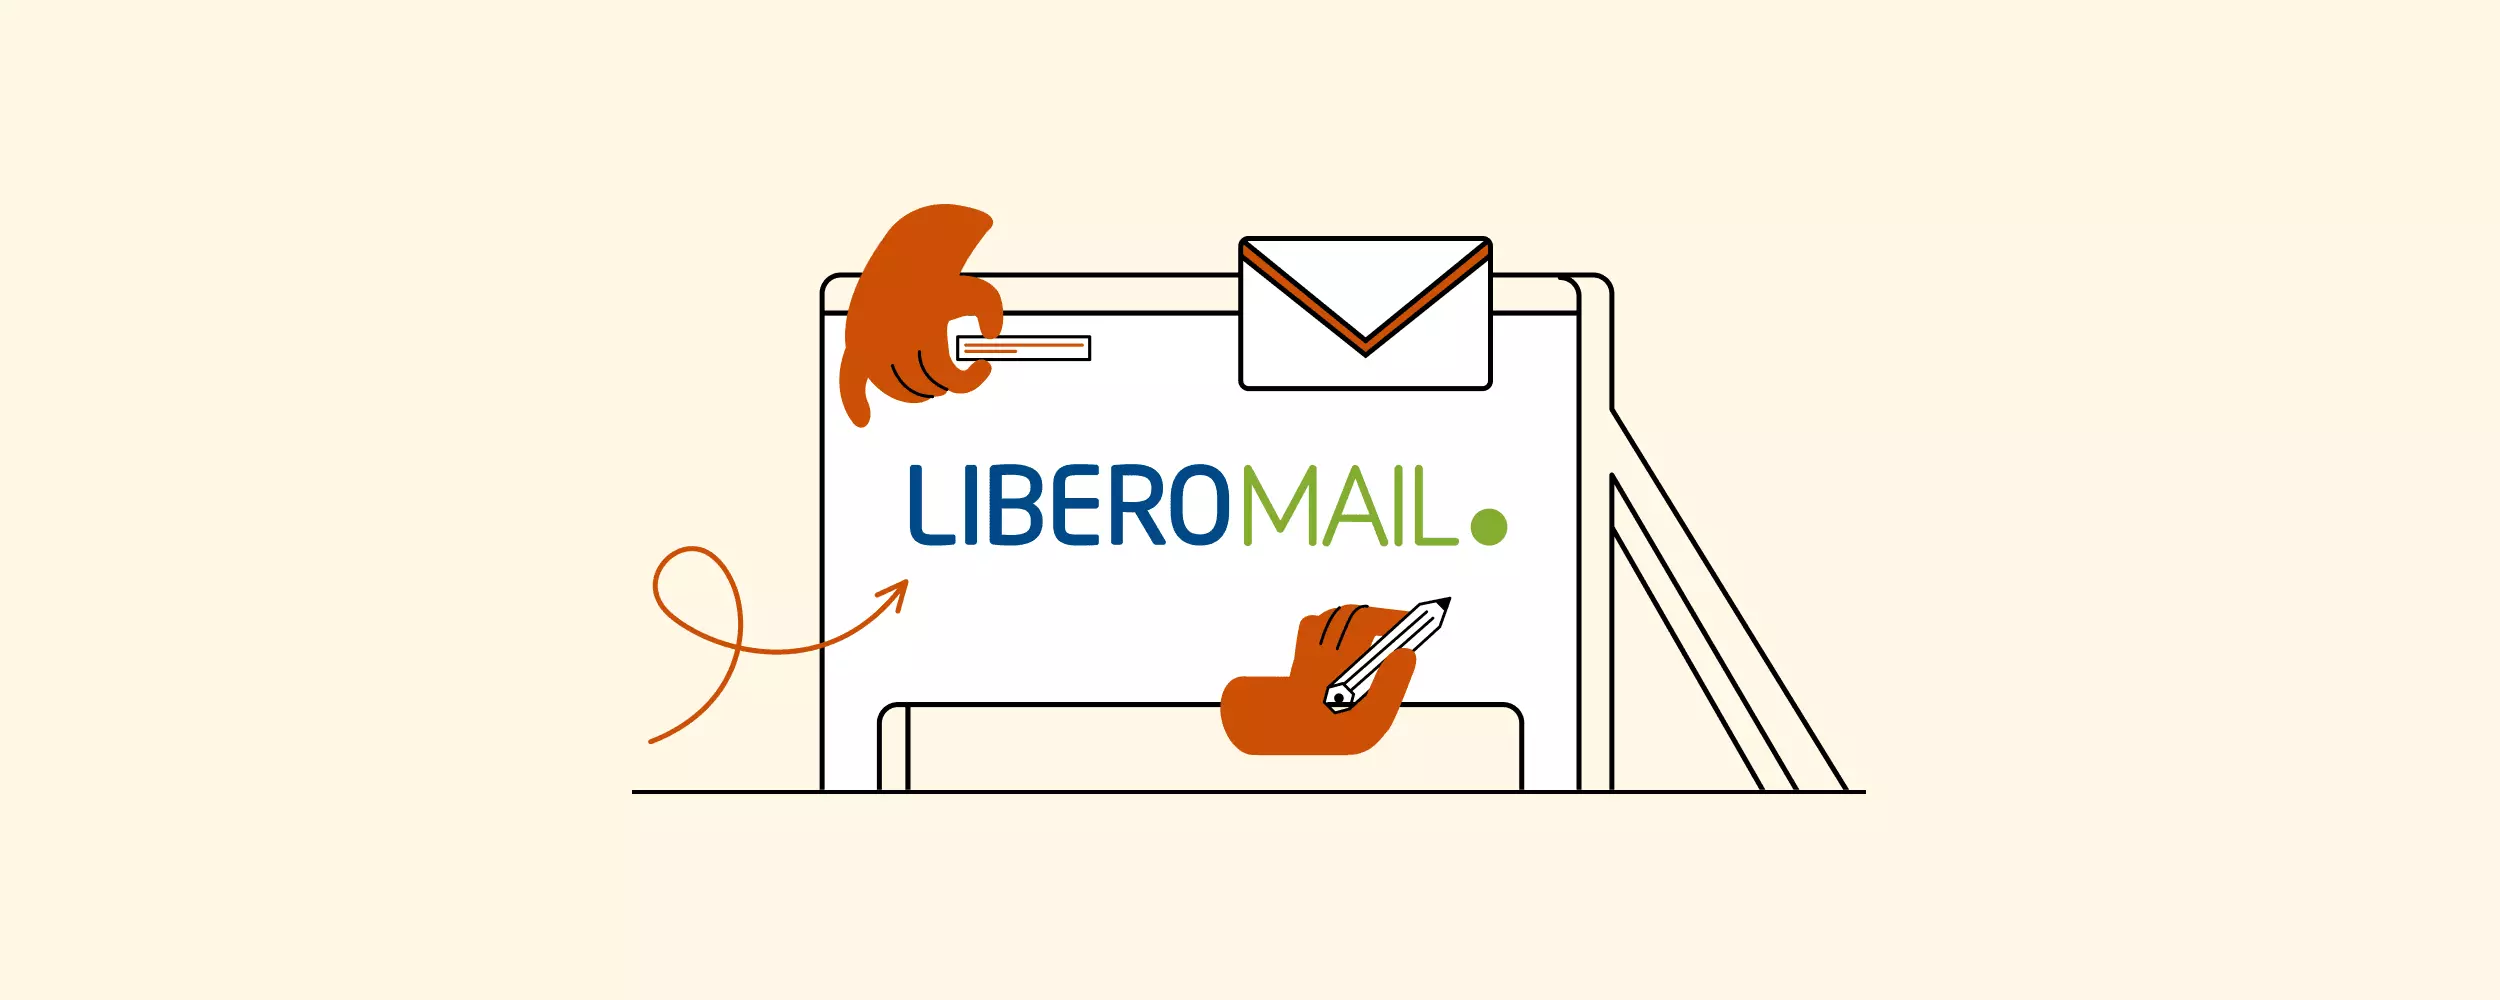 Libero Mail: A Full Guide on Using the Email Service